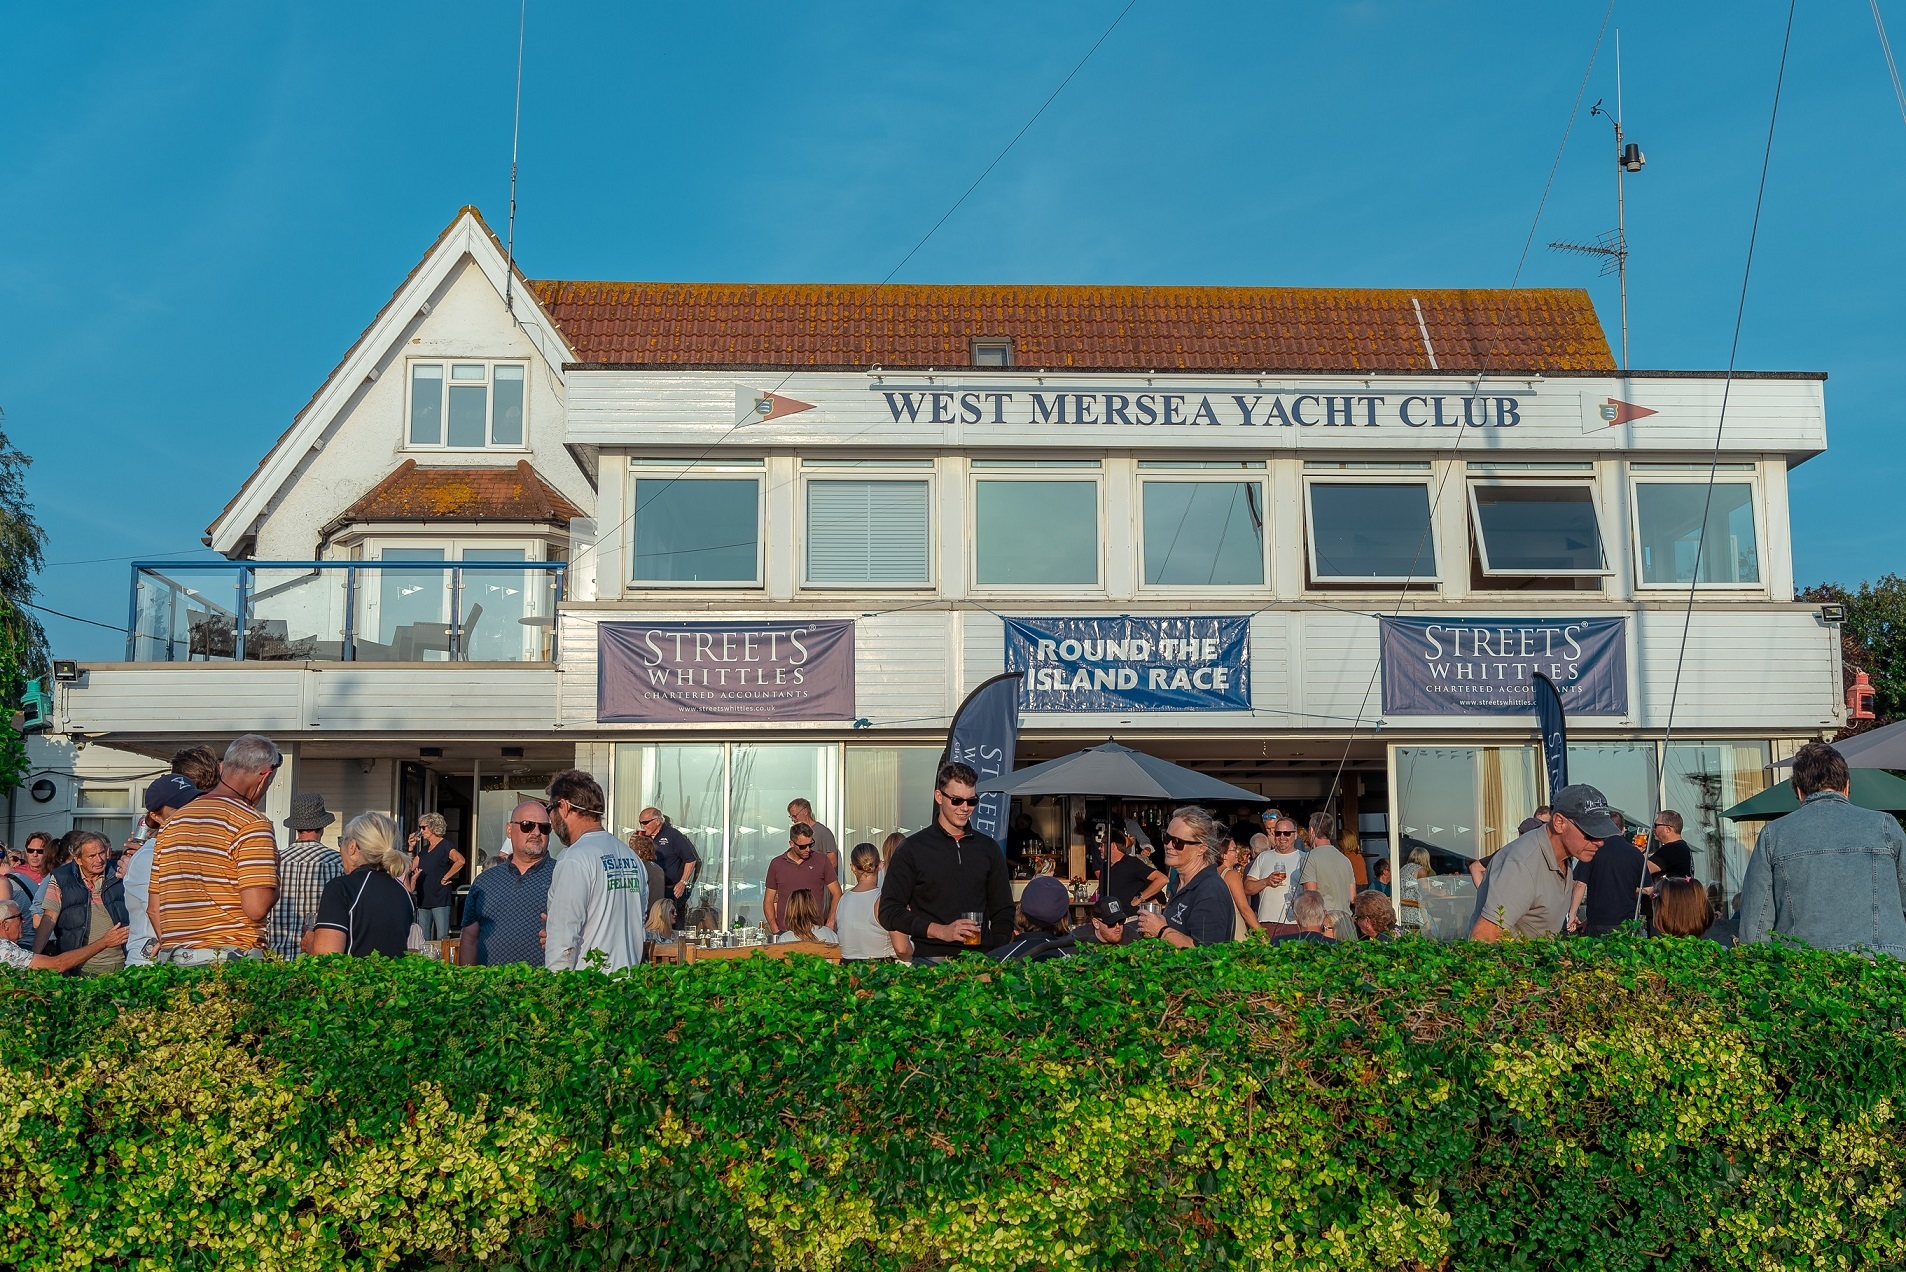 Image to represent Mersea Week celebrations continue into September with the Round Mersea Island Race, sponsored this year by Streets Whittles